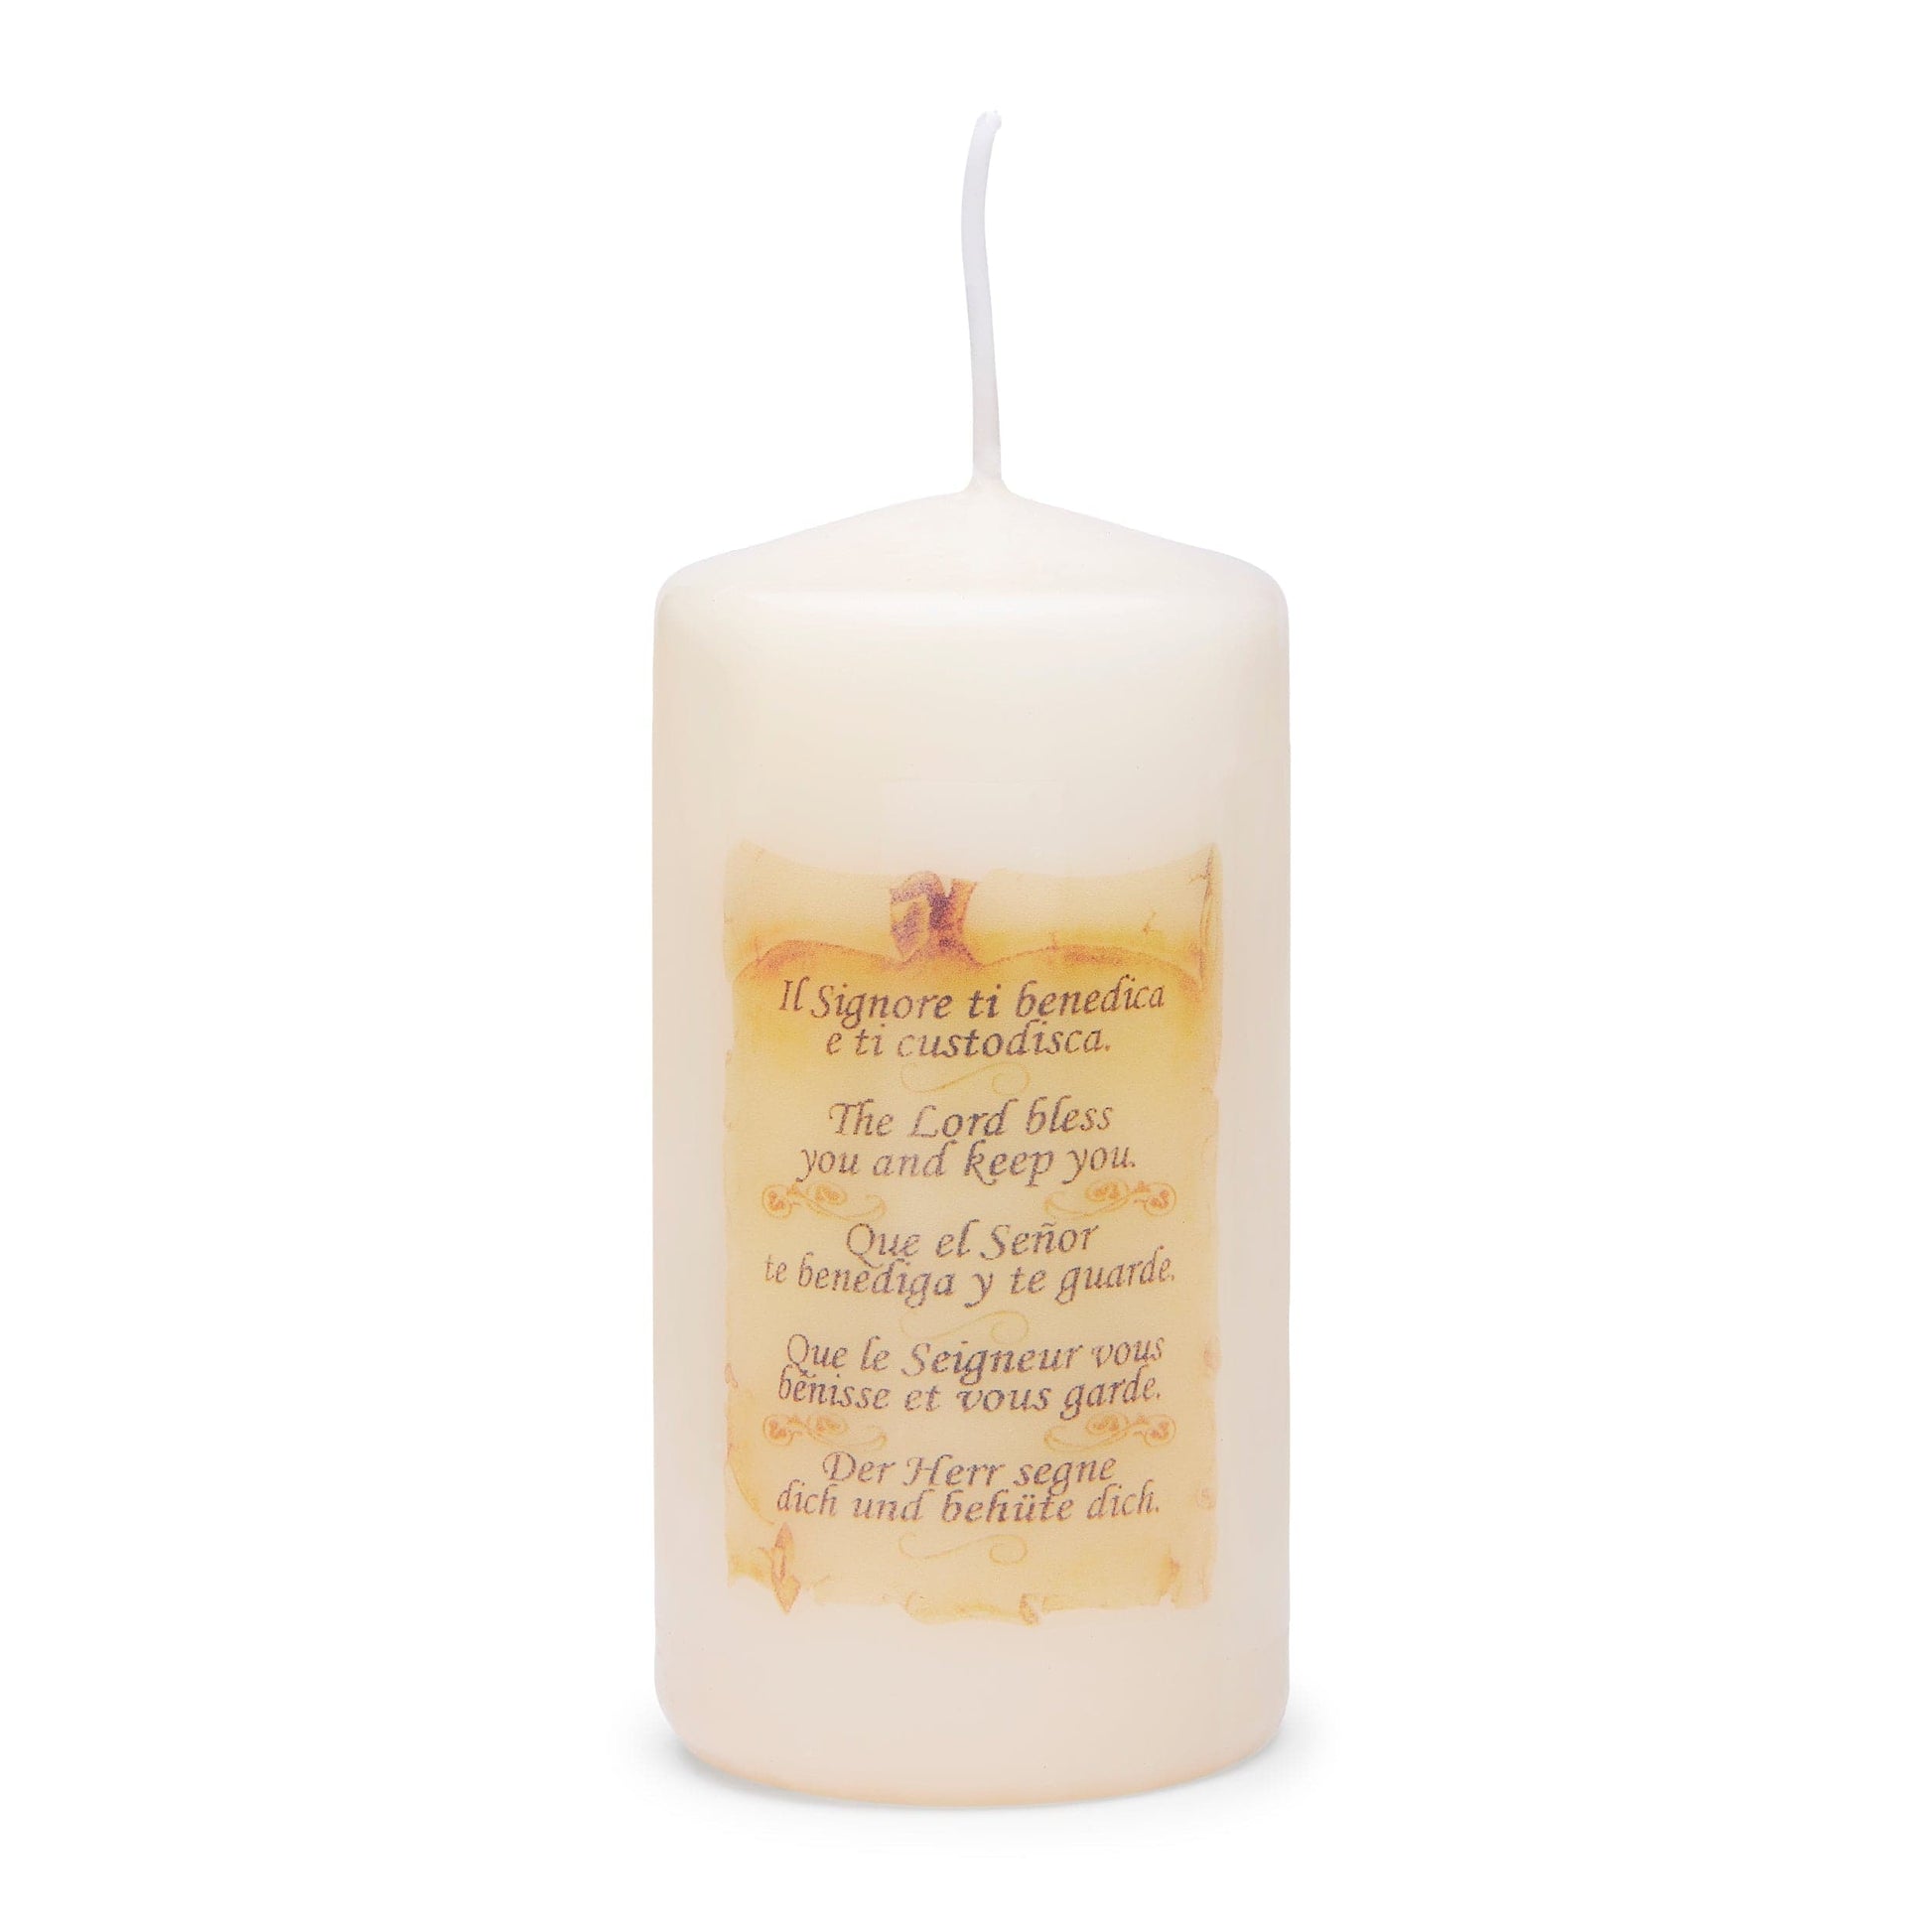 MONDO CATTOLICO Cm 8 (3.1 inches) Candle with Saint Peter Basilica